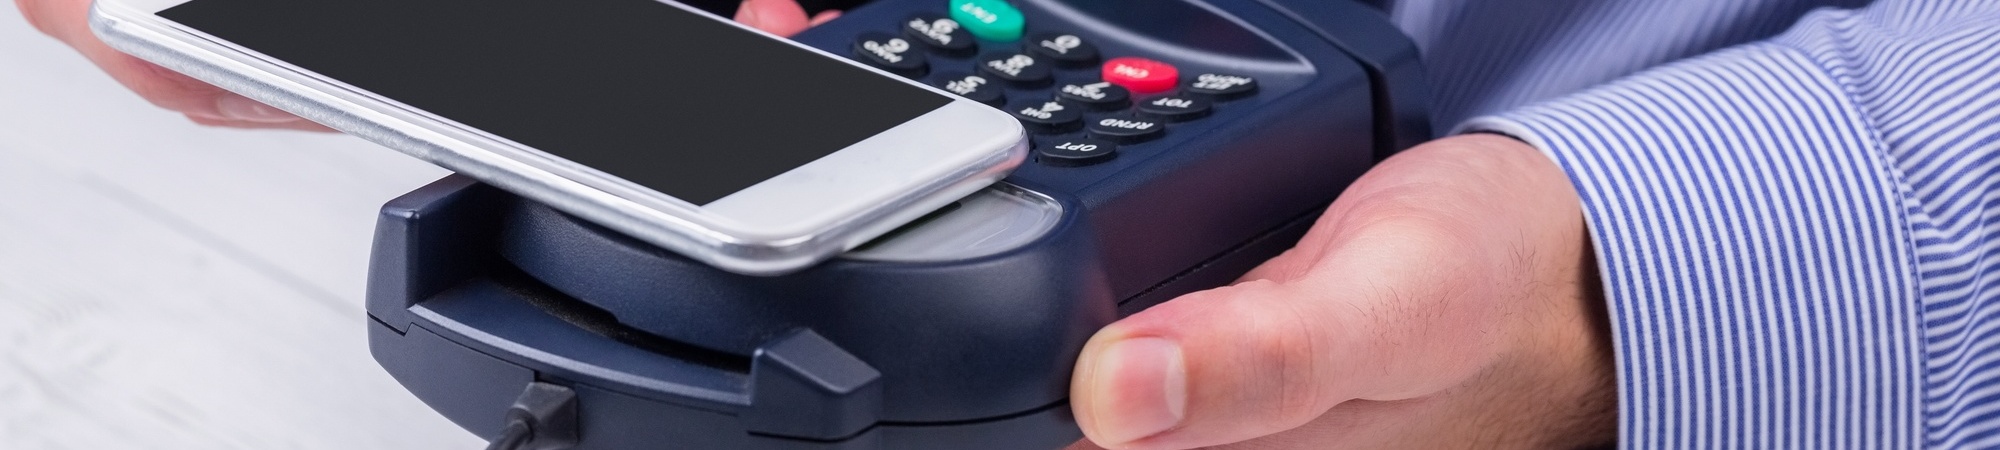 Worldpay and Verifone extend UK POS technology deal